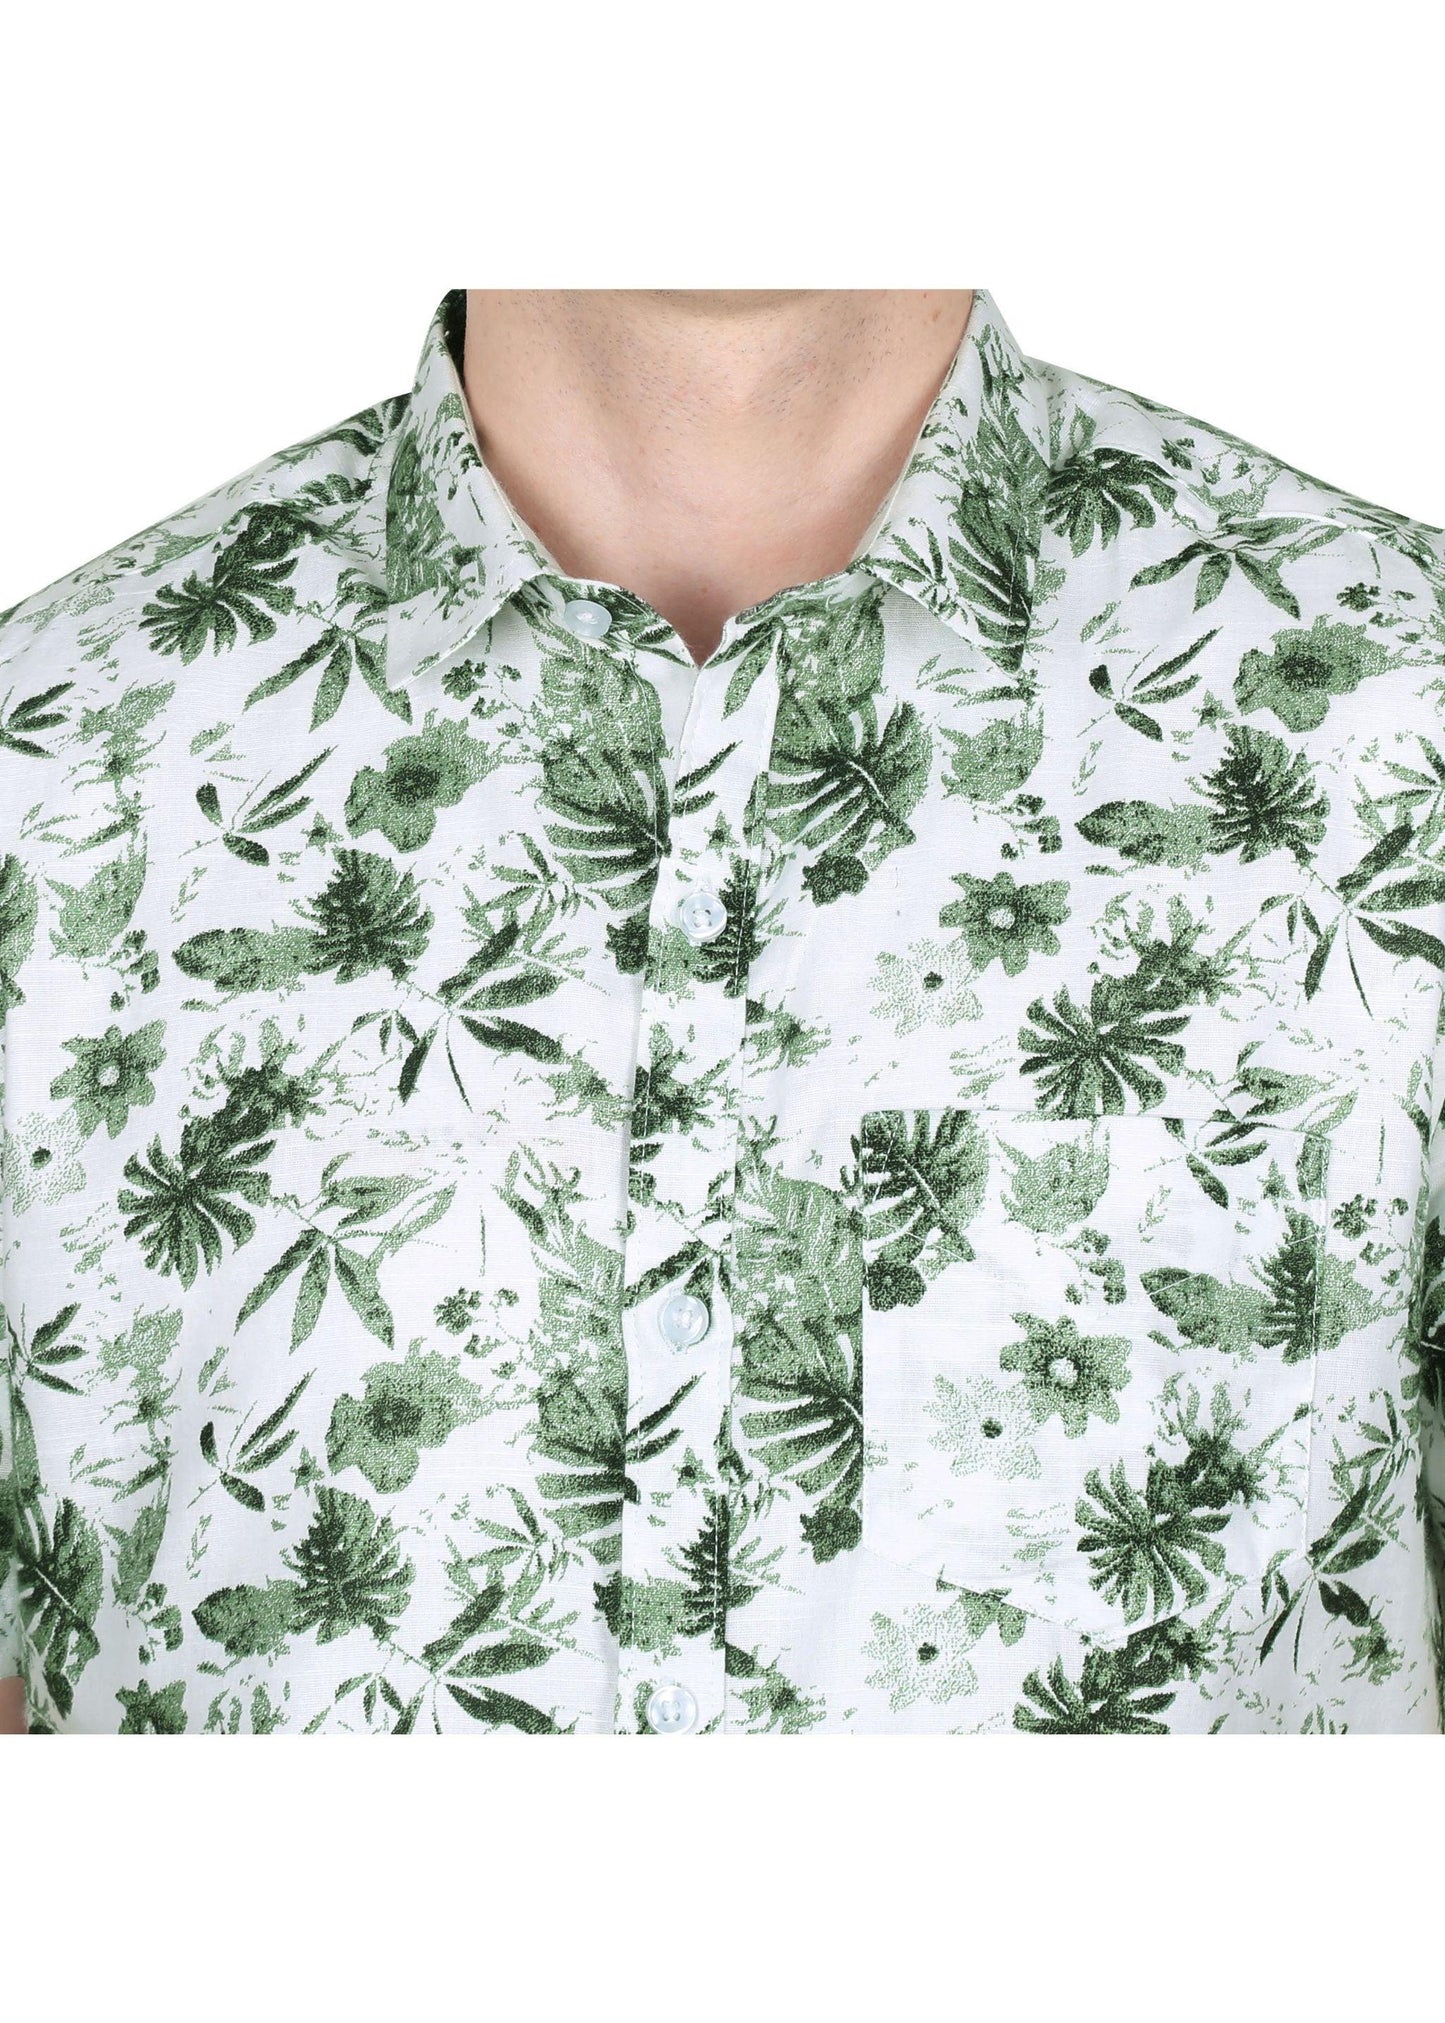 Tusok-orchardFeatured Shirt, Vacation-Printed Shirtimage-Green Linen (5)